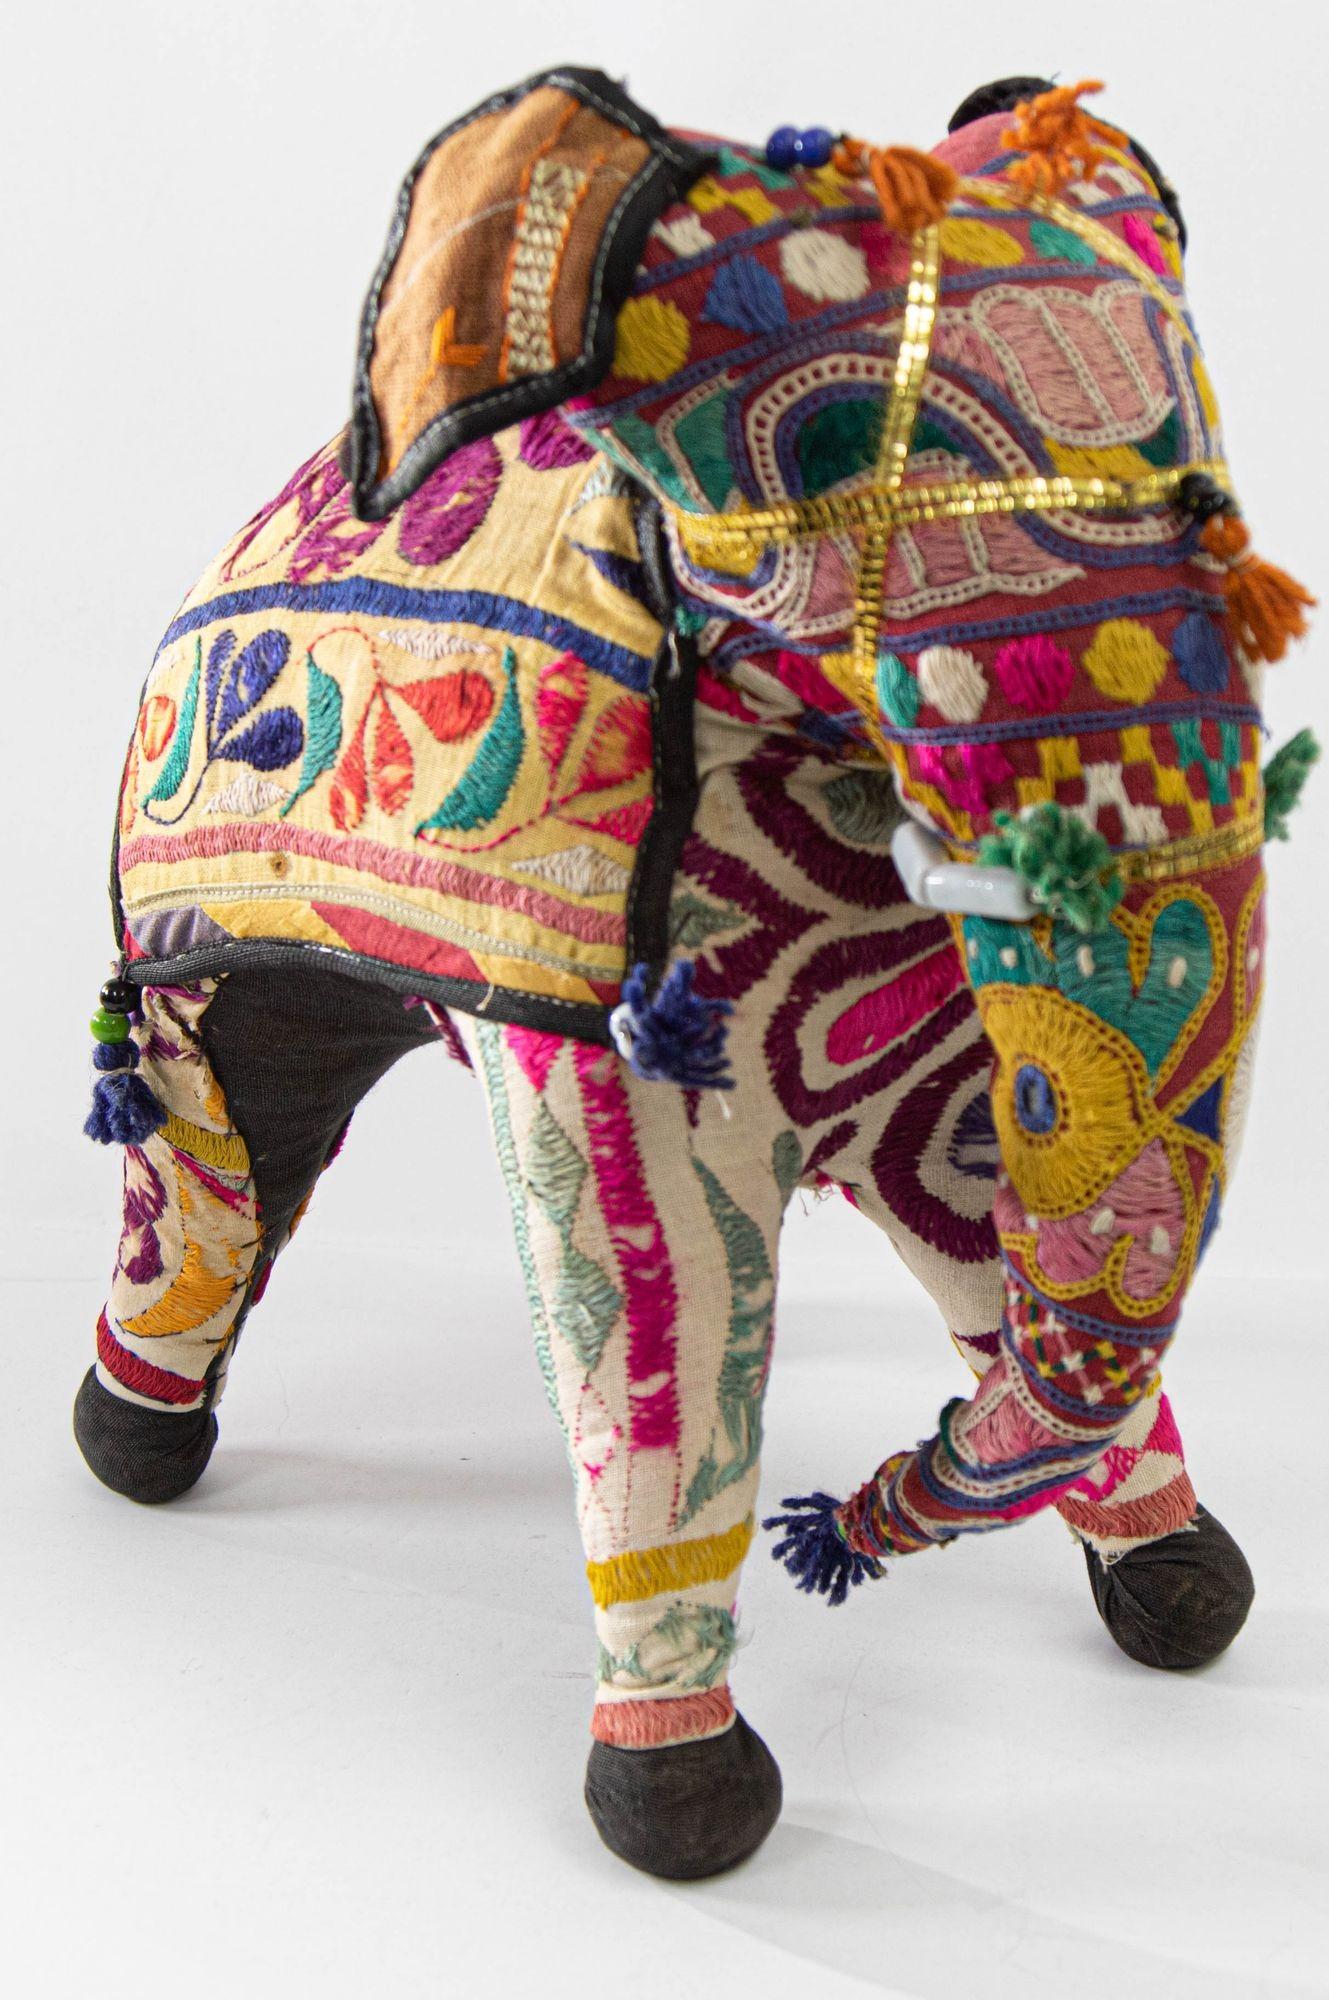 Vintage Handcrafted Stuffed Cotton Embroidered Ceremonial Elephant Toy Raj India en vente 7